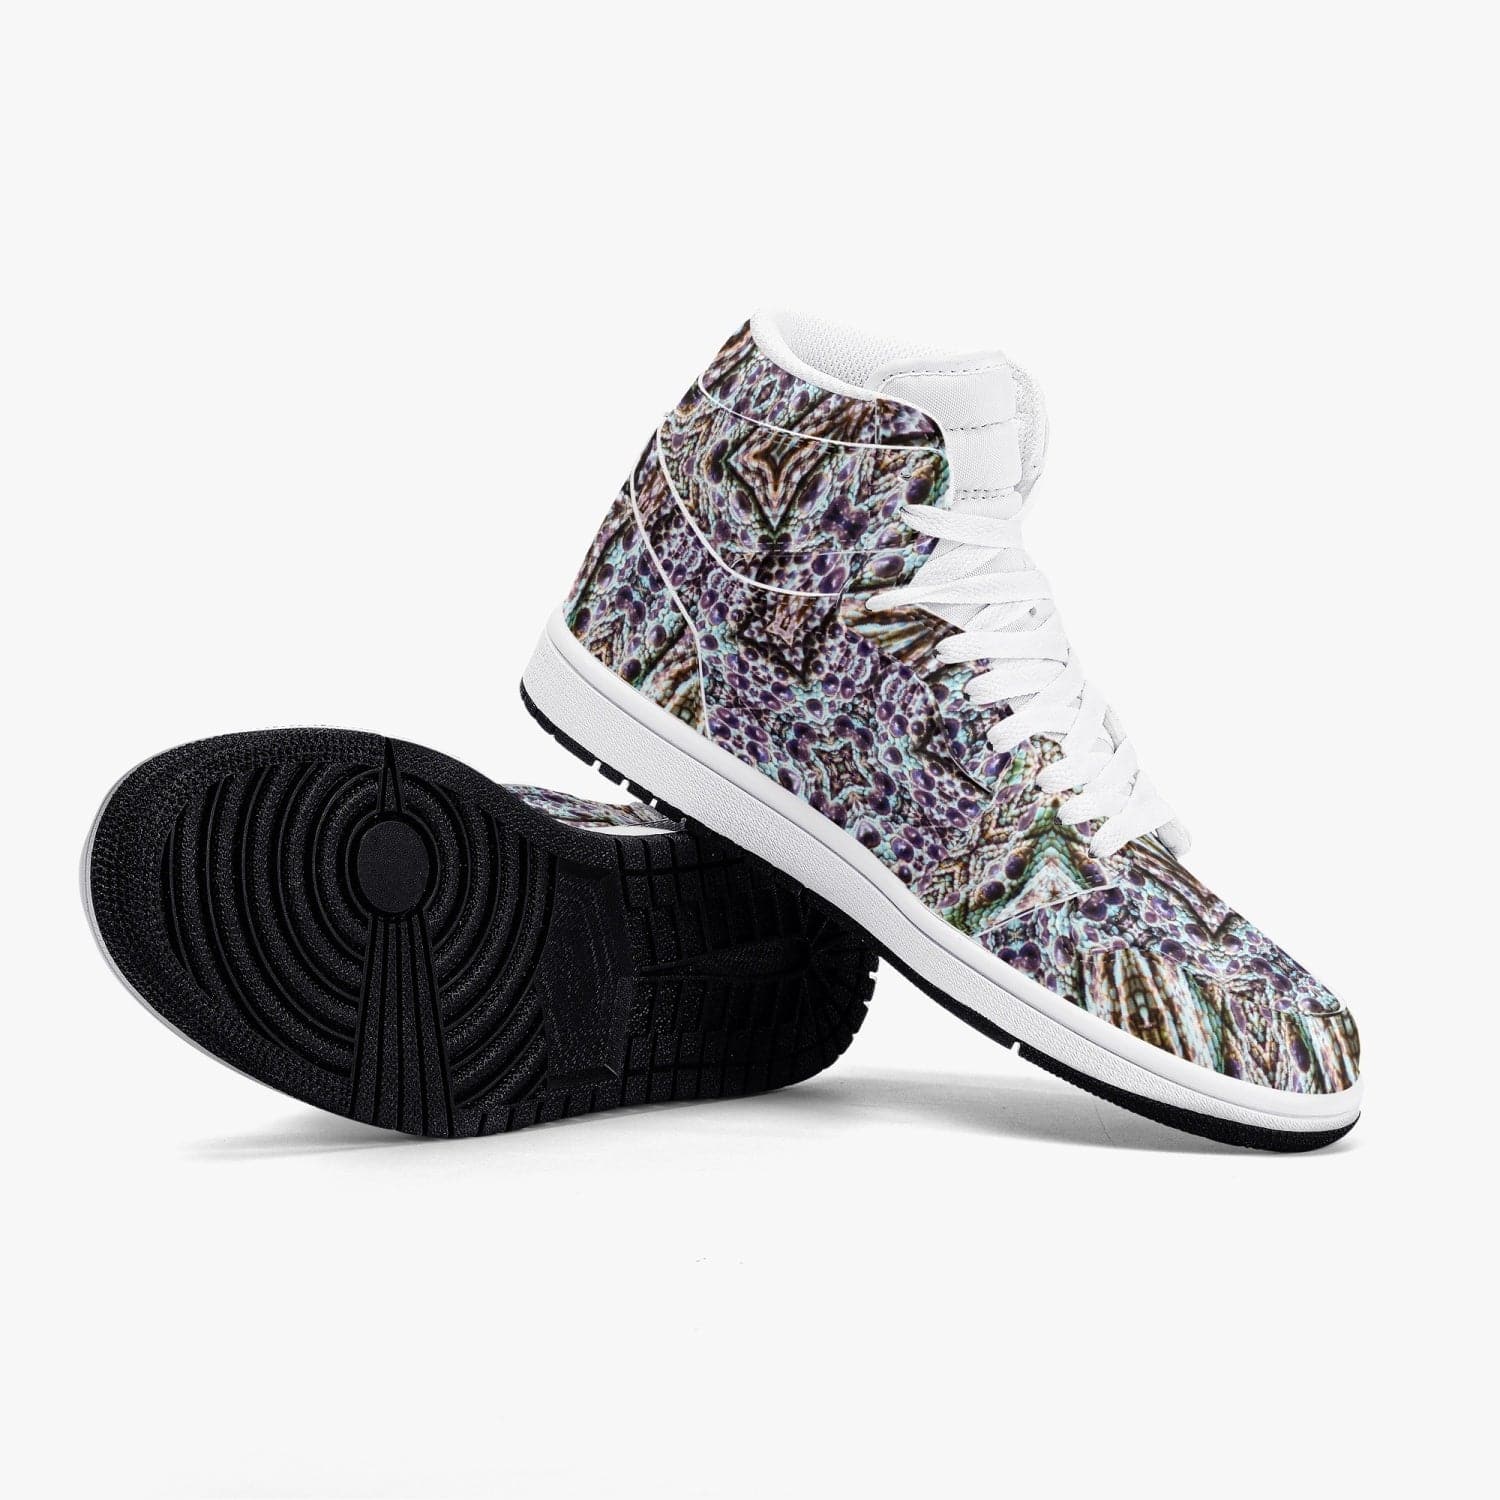 White purple and blue Lizard  New Black High-Top Leather Sneakers, by Sensus Studio Design